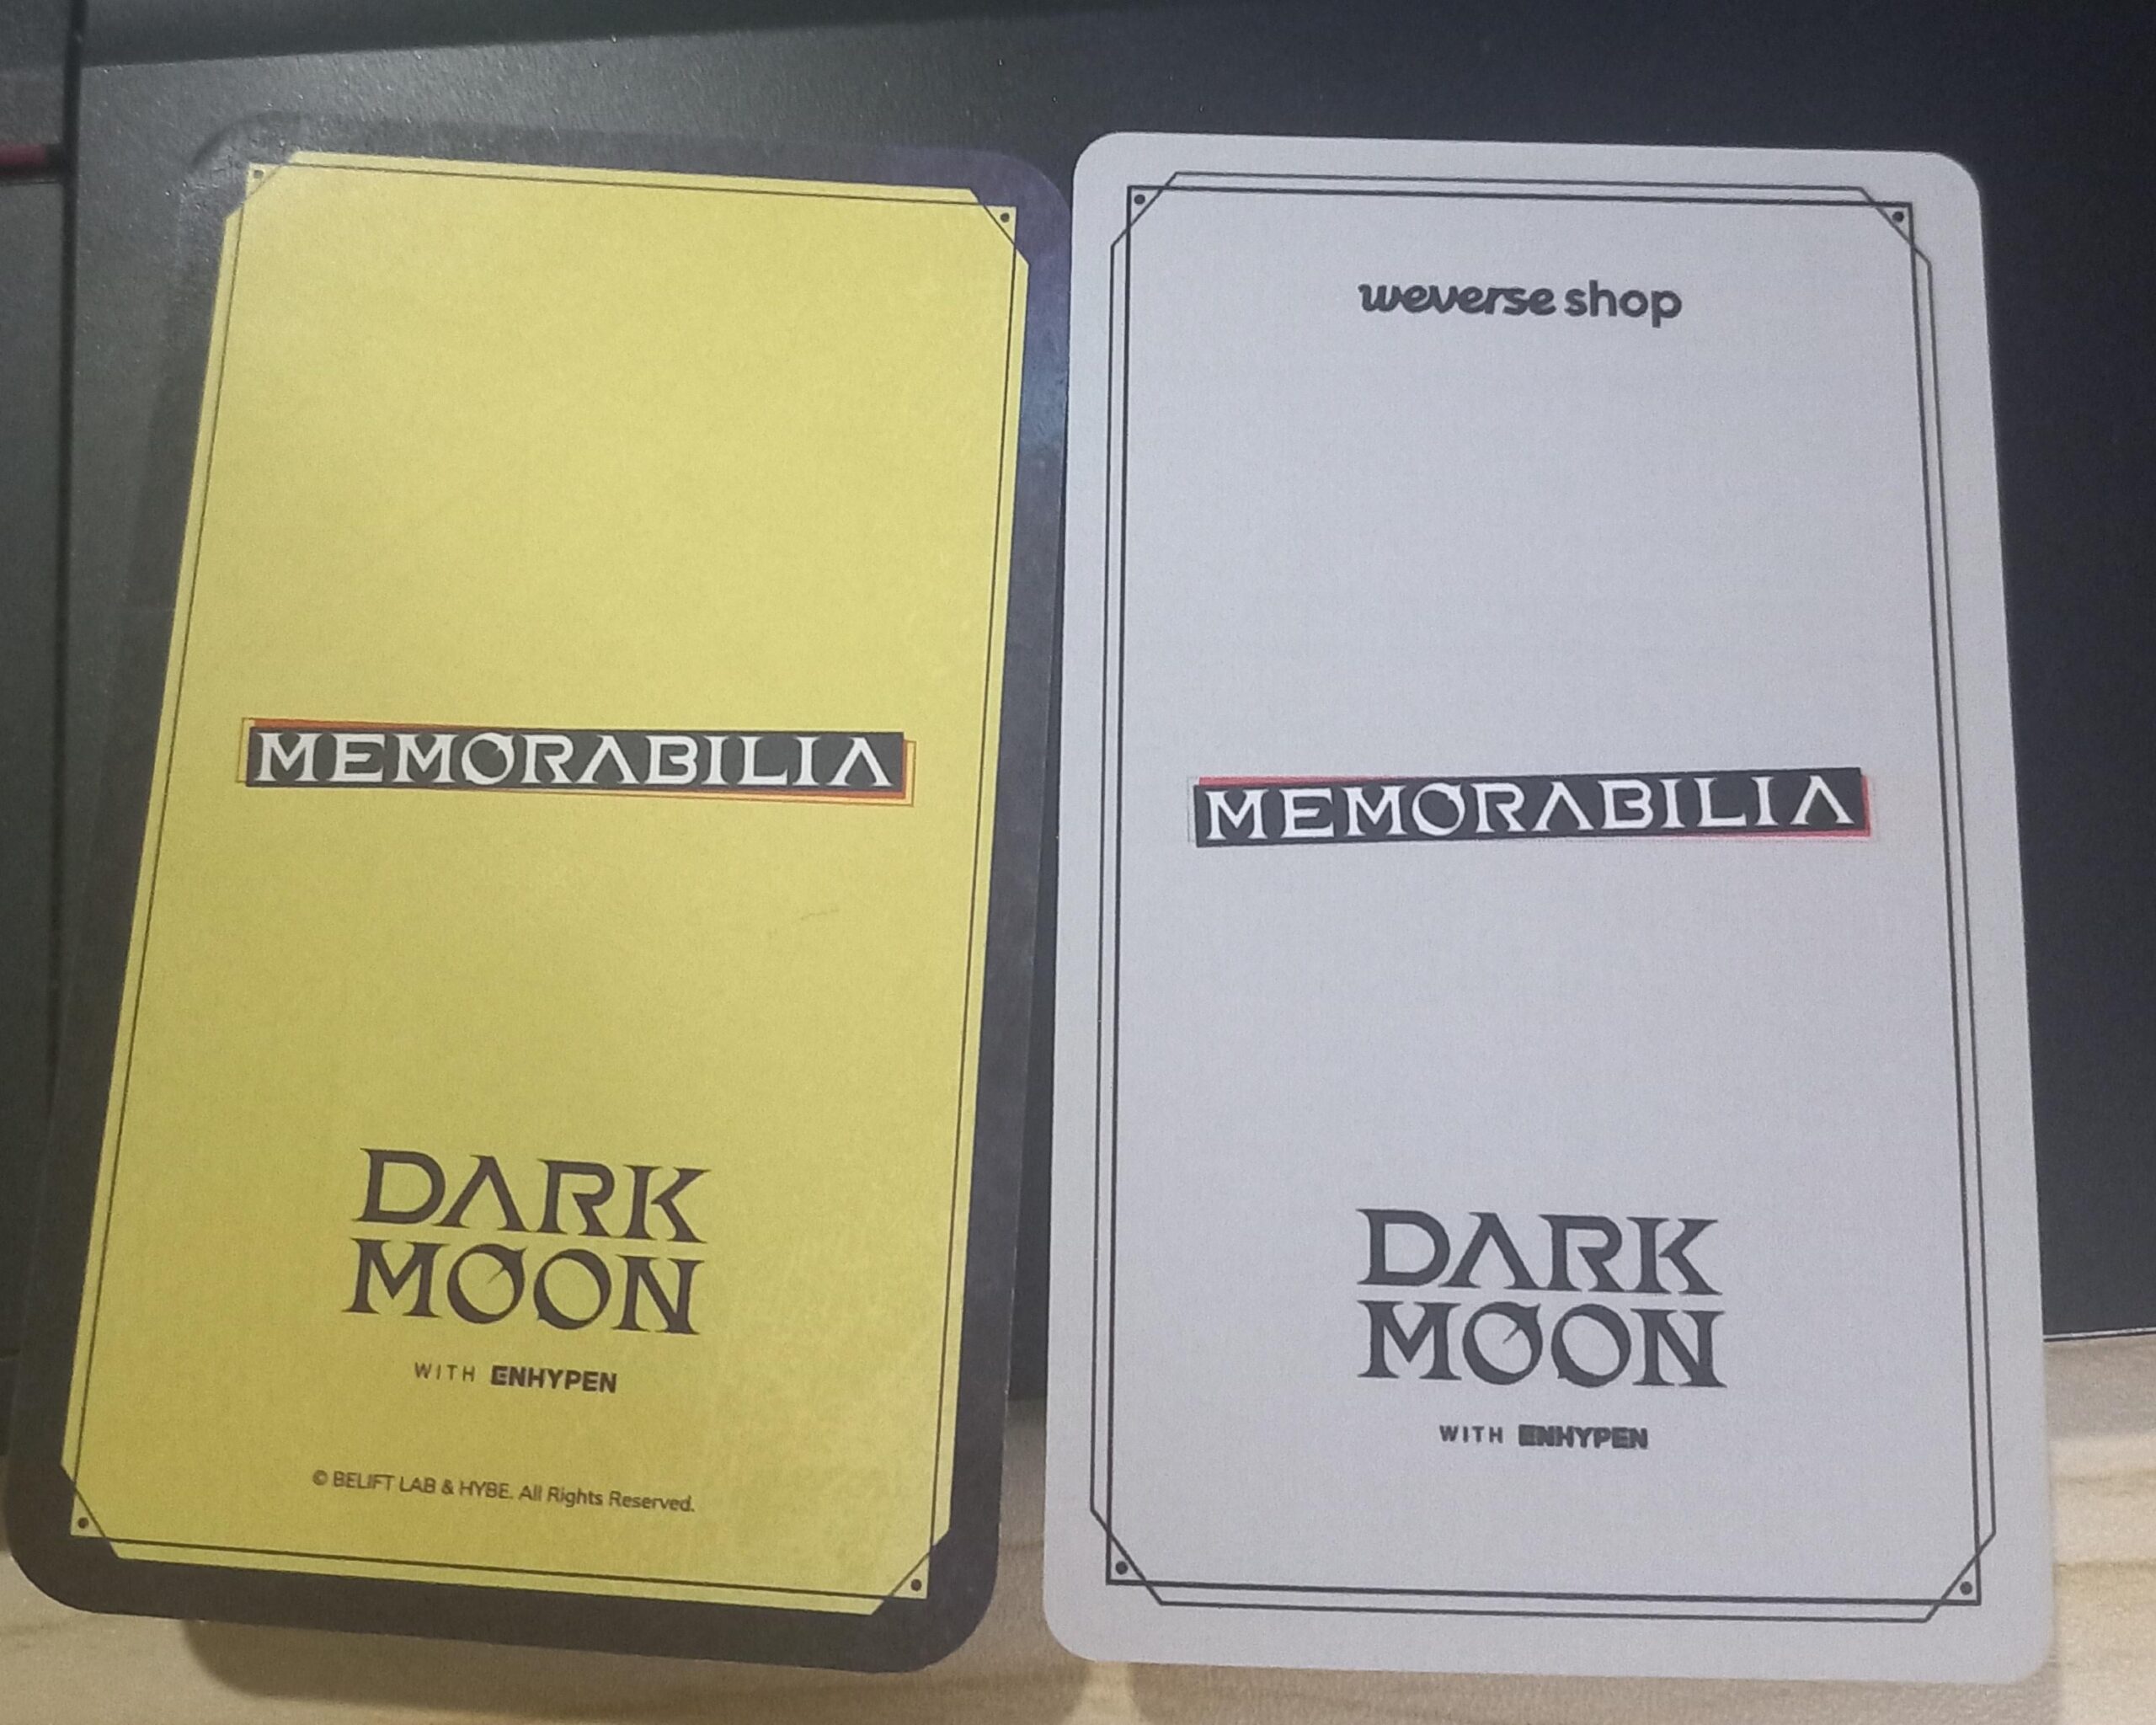 Difference between these cards?